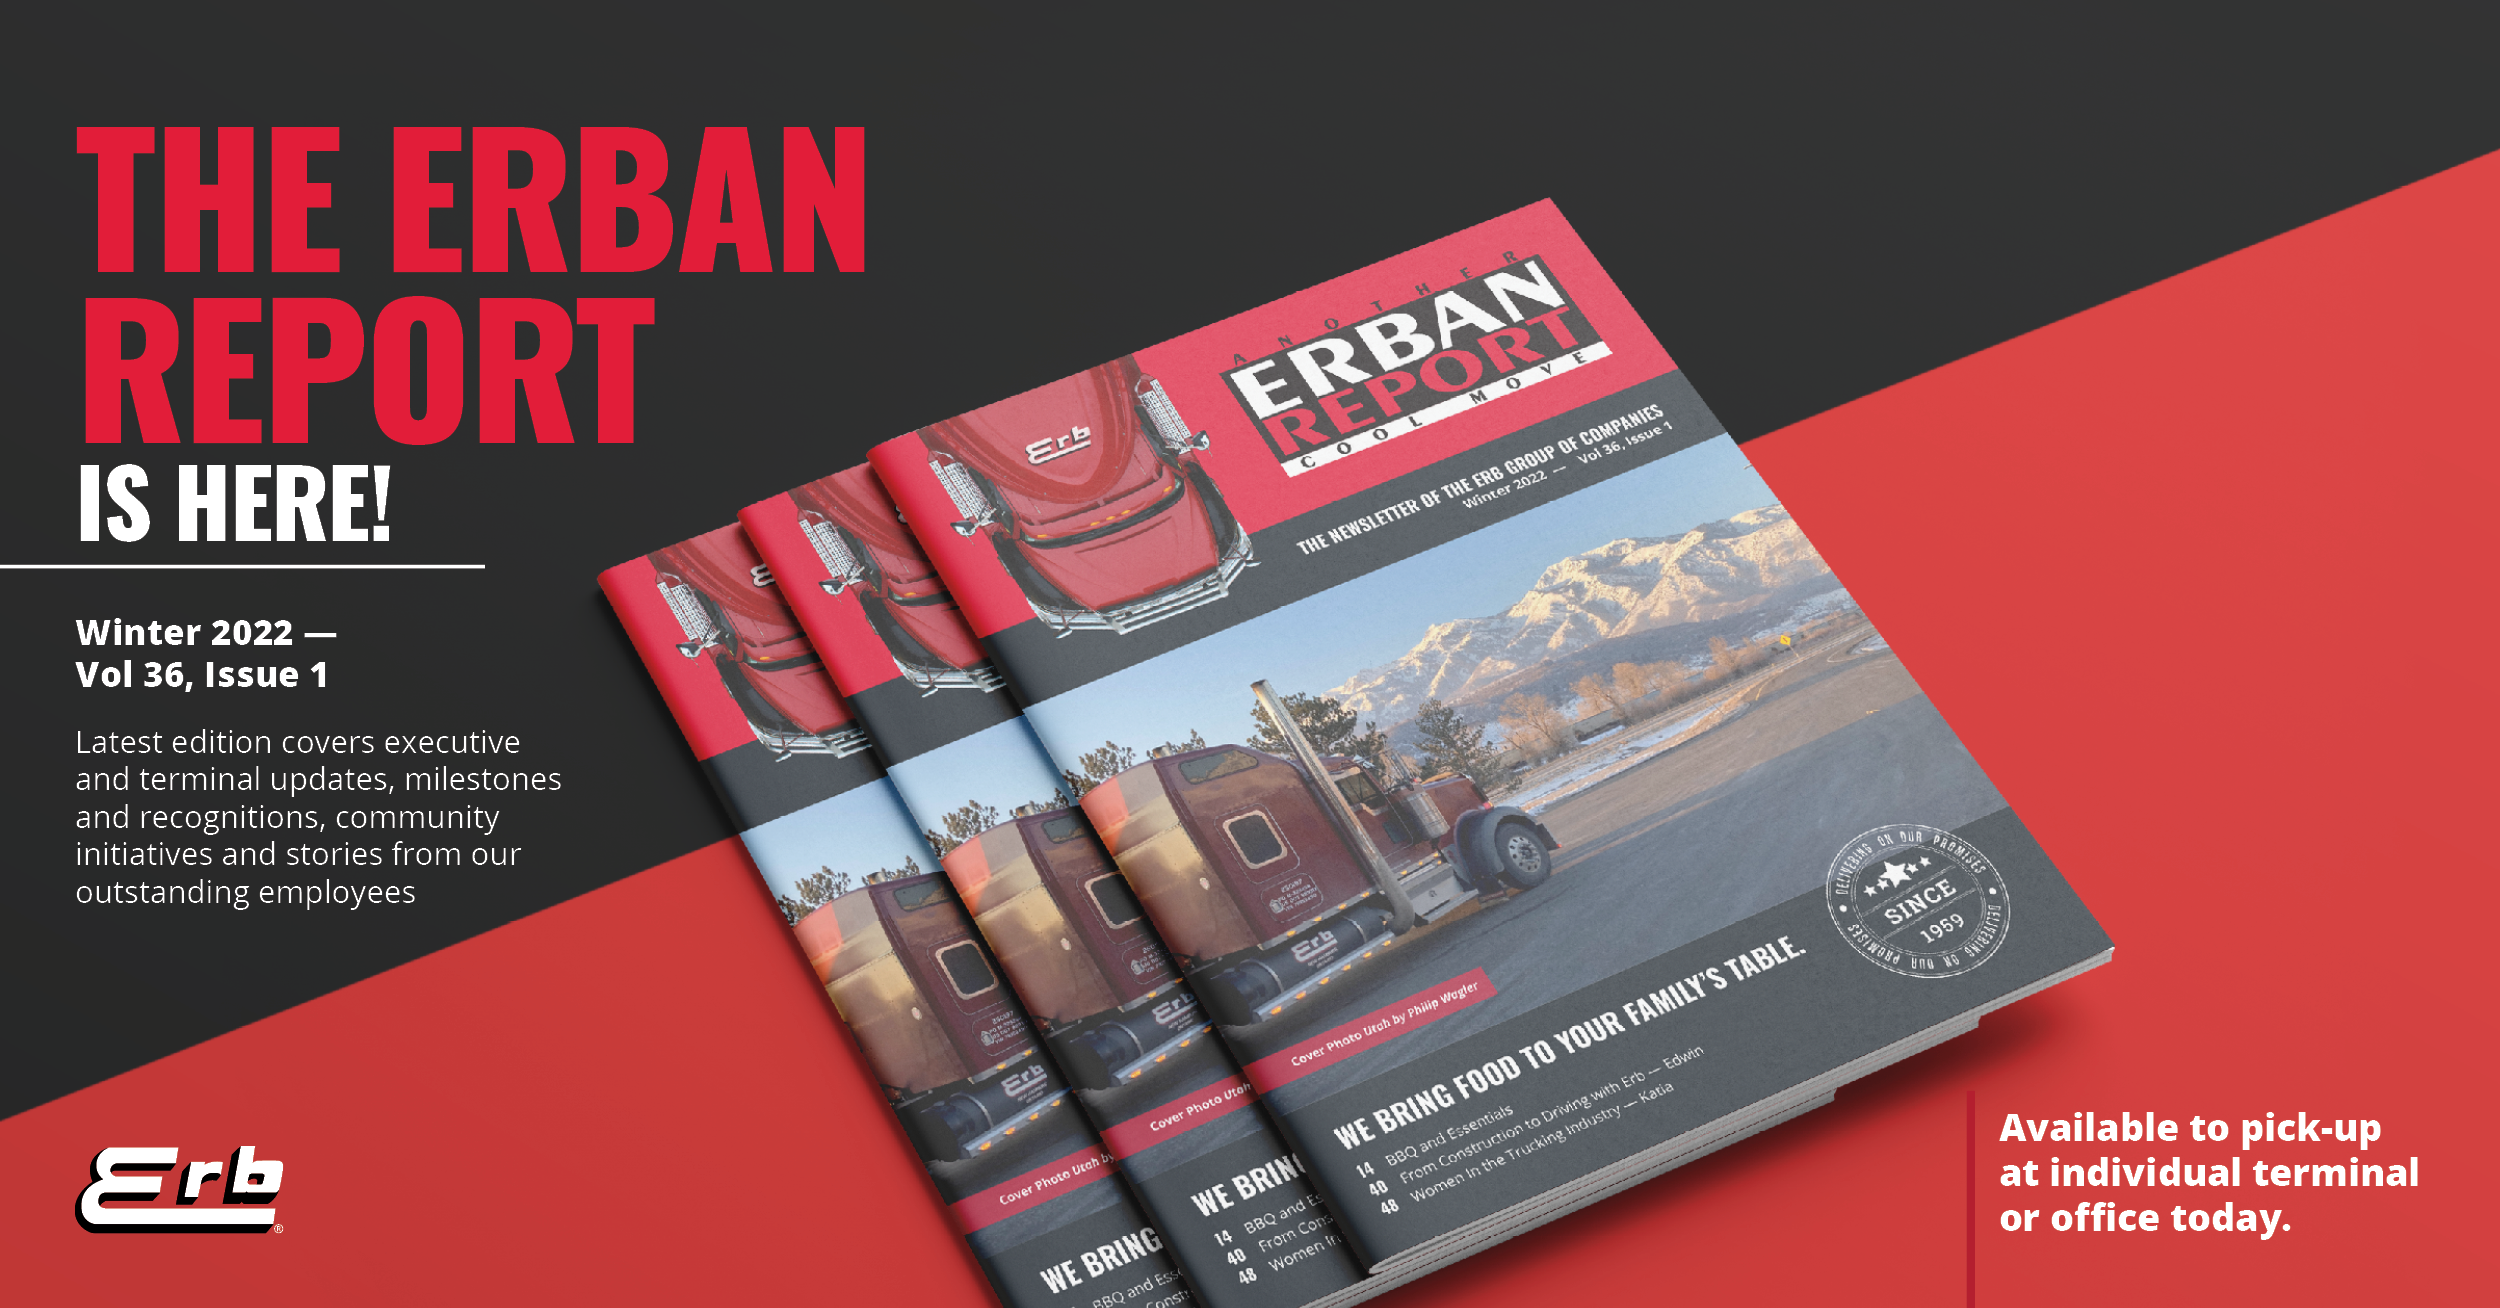 The Erban Report is here!     Winter 2022 edition